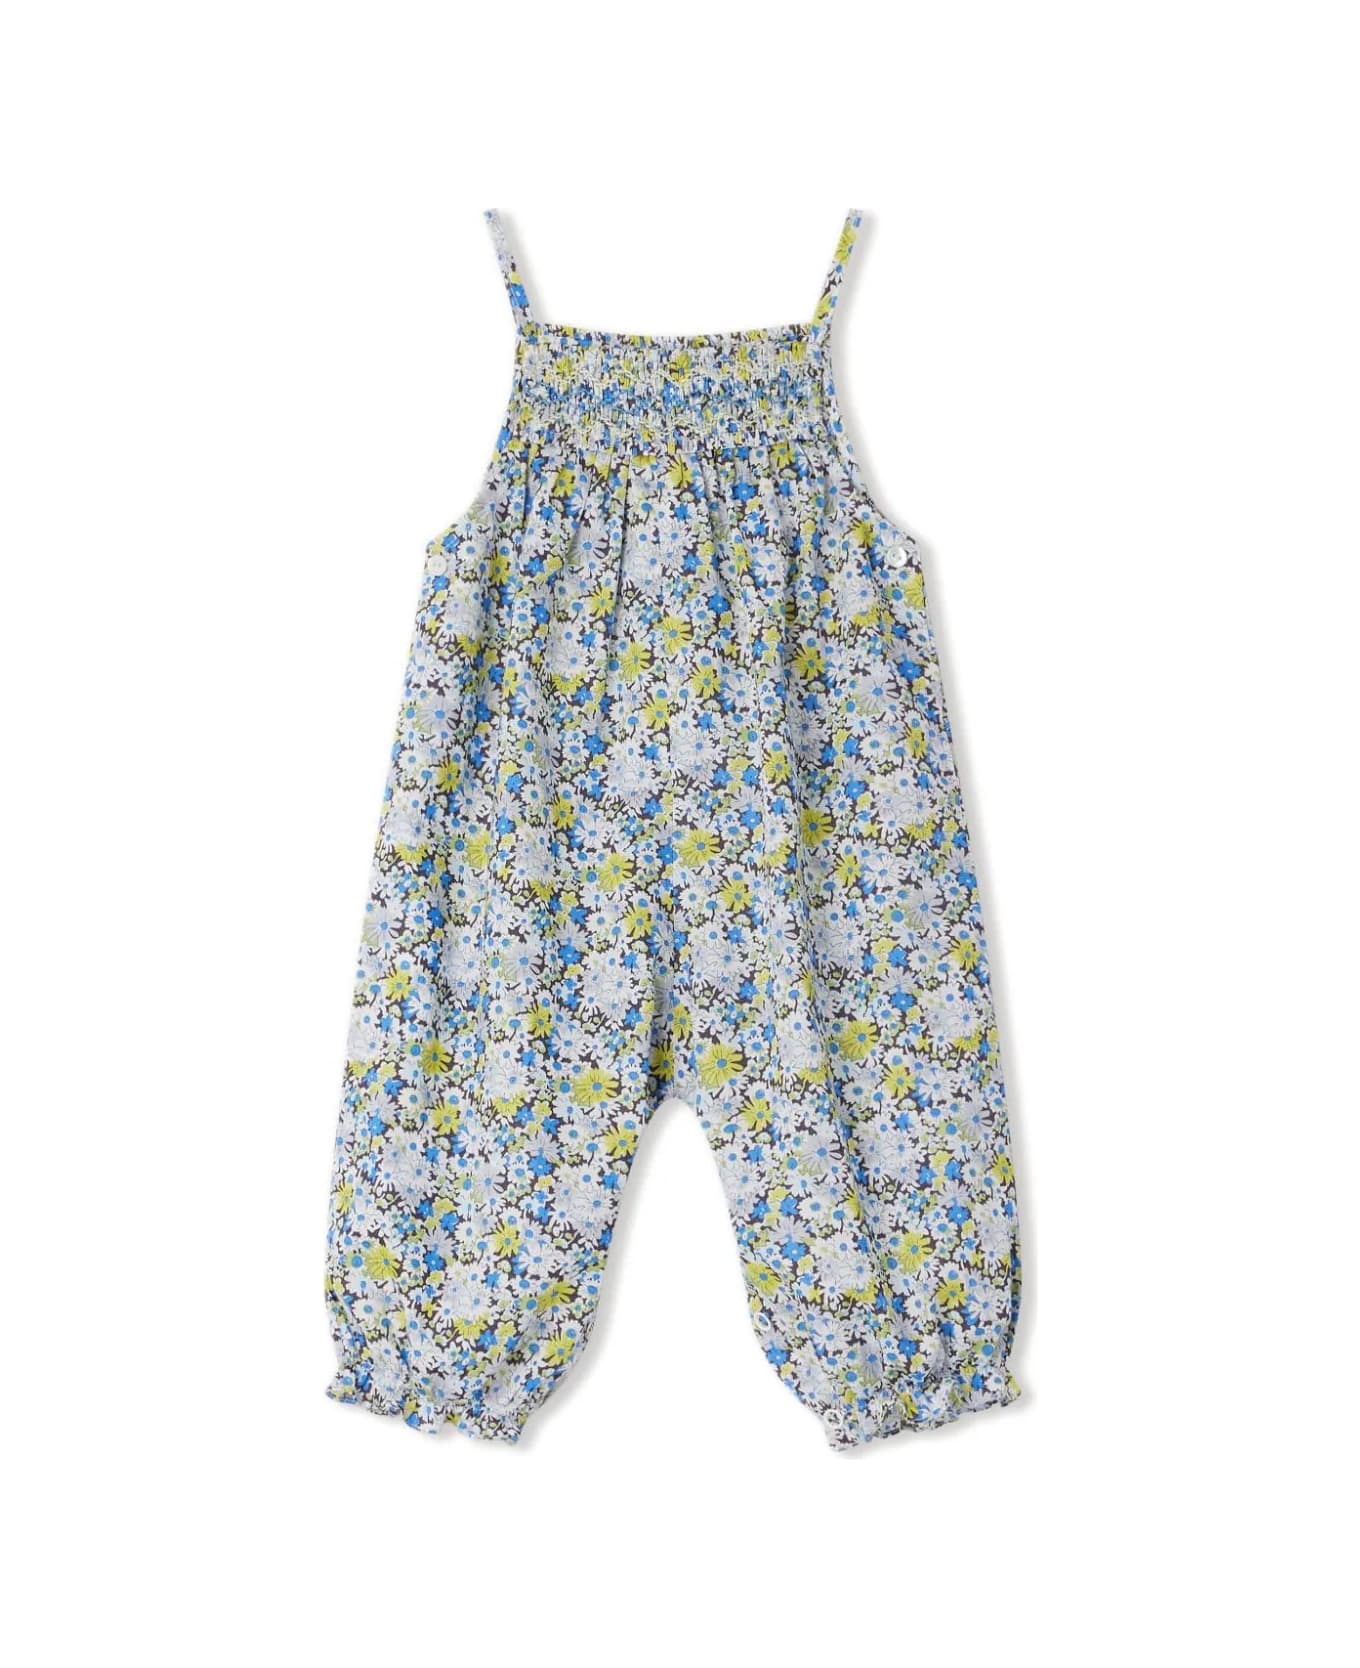 Bonpoint Lilisy Smocked Overalls In Blue Flowers - Blue